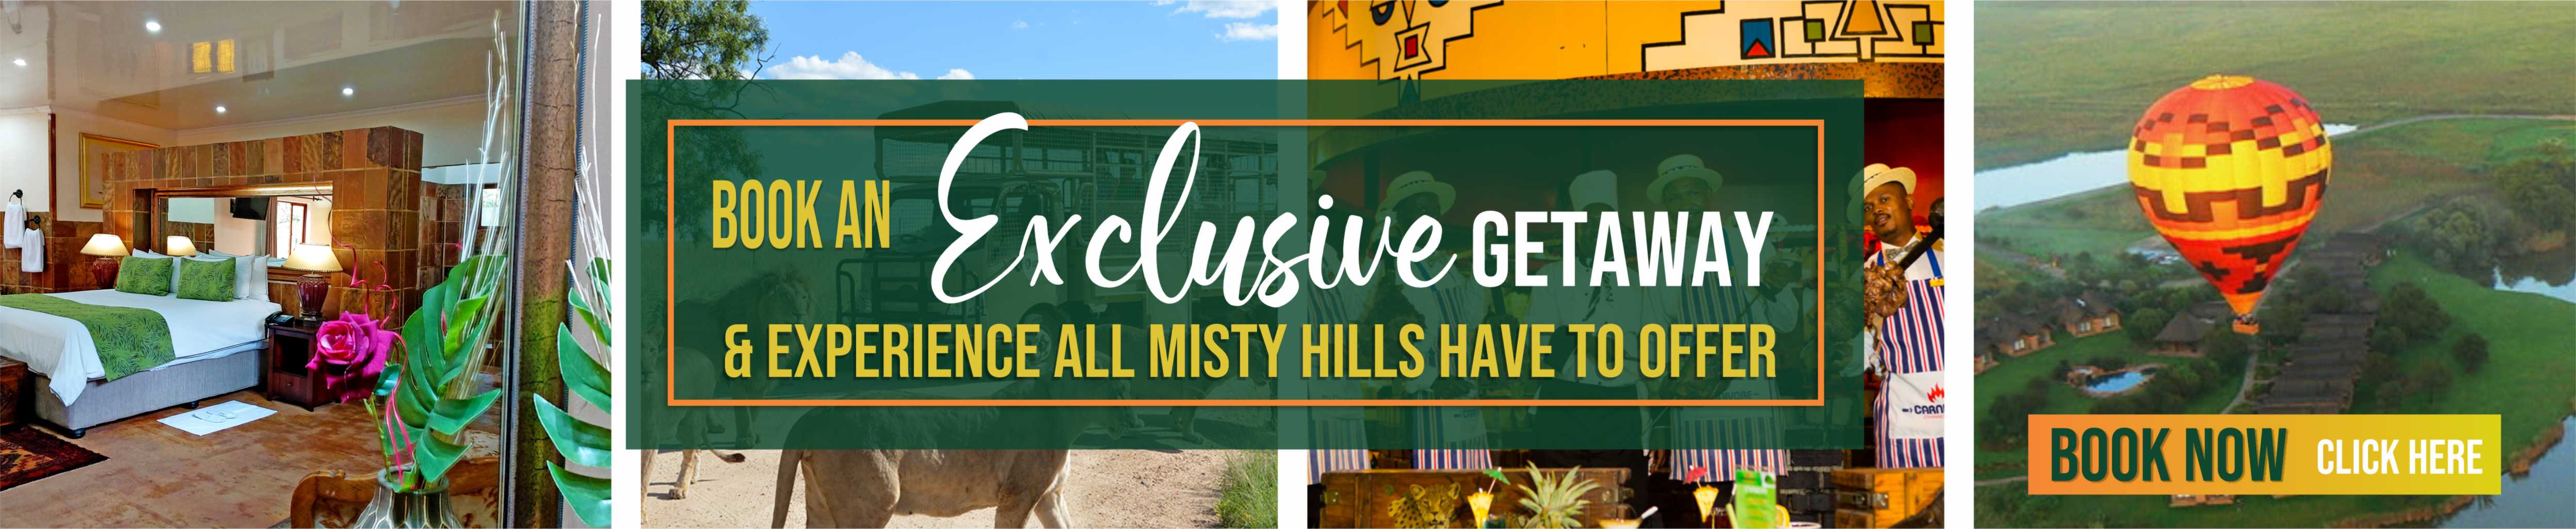 Misty Hills Country Hotel Cradle of Humankind Experience including Maropeng, Lion Park Safari Tours